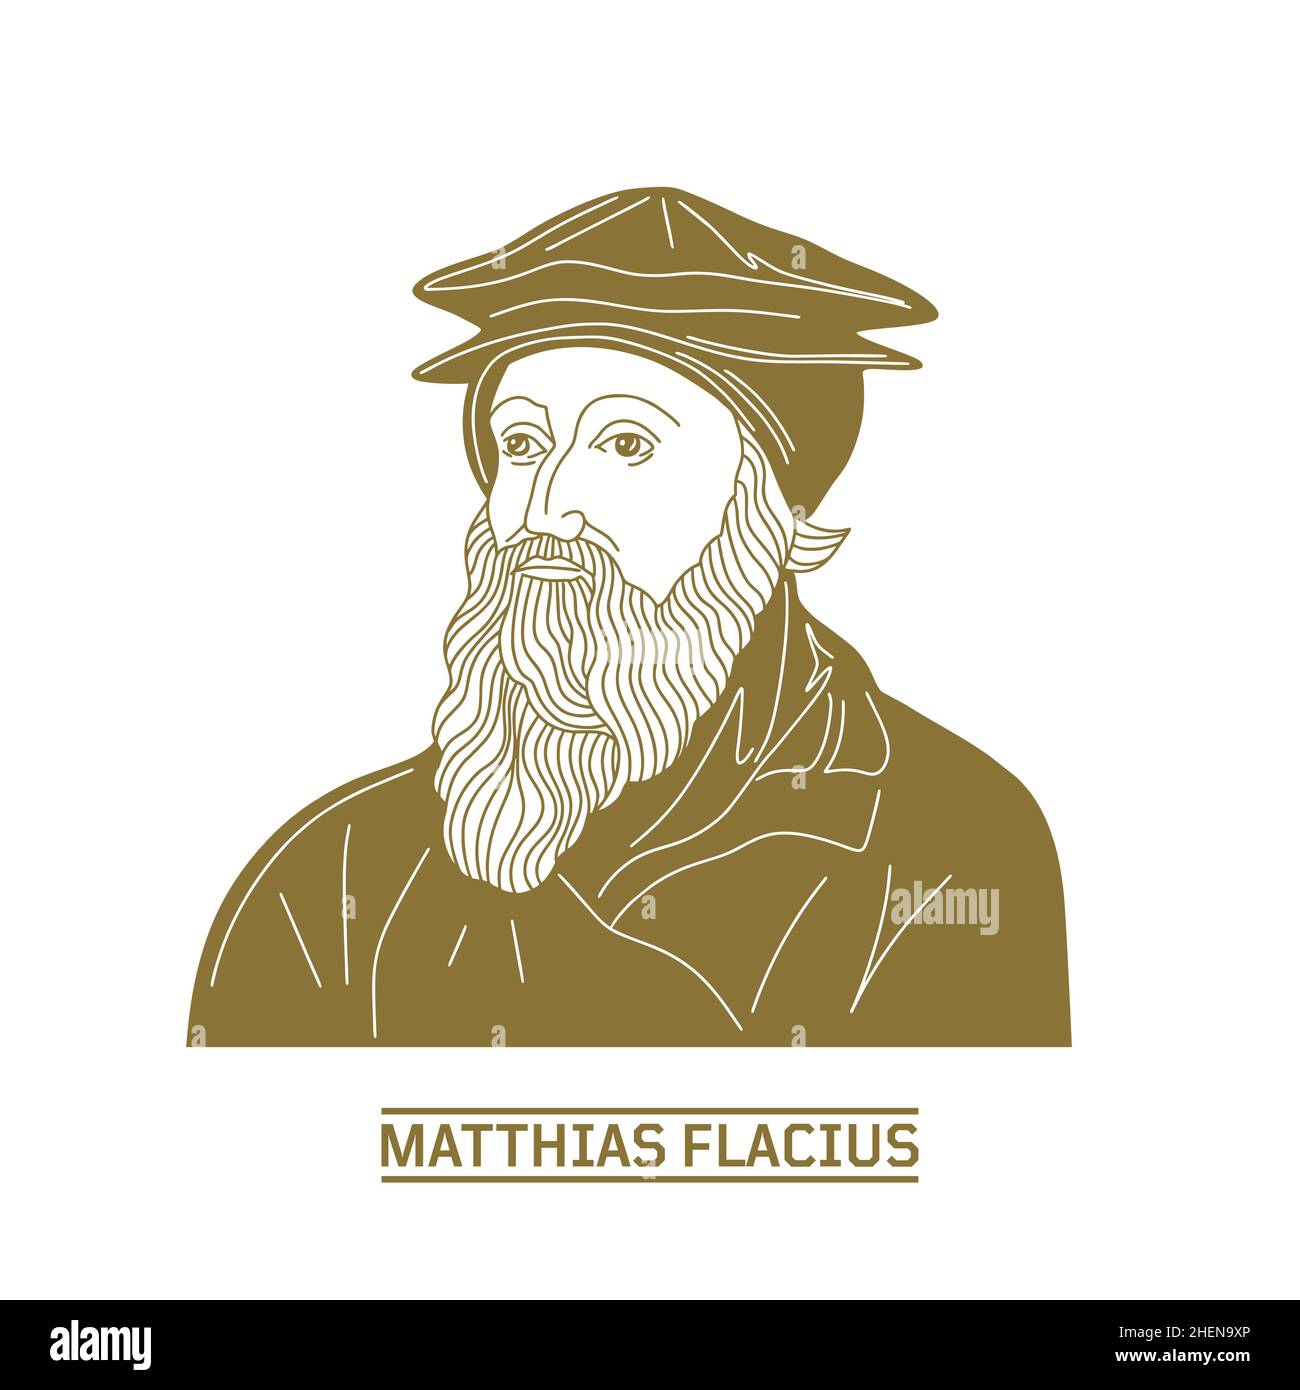 Matthias Flacius (1520-1575) was a Lutheran reformer from Istria. Christian figure. Stock Vector